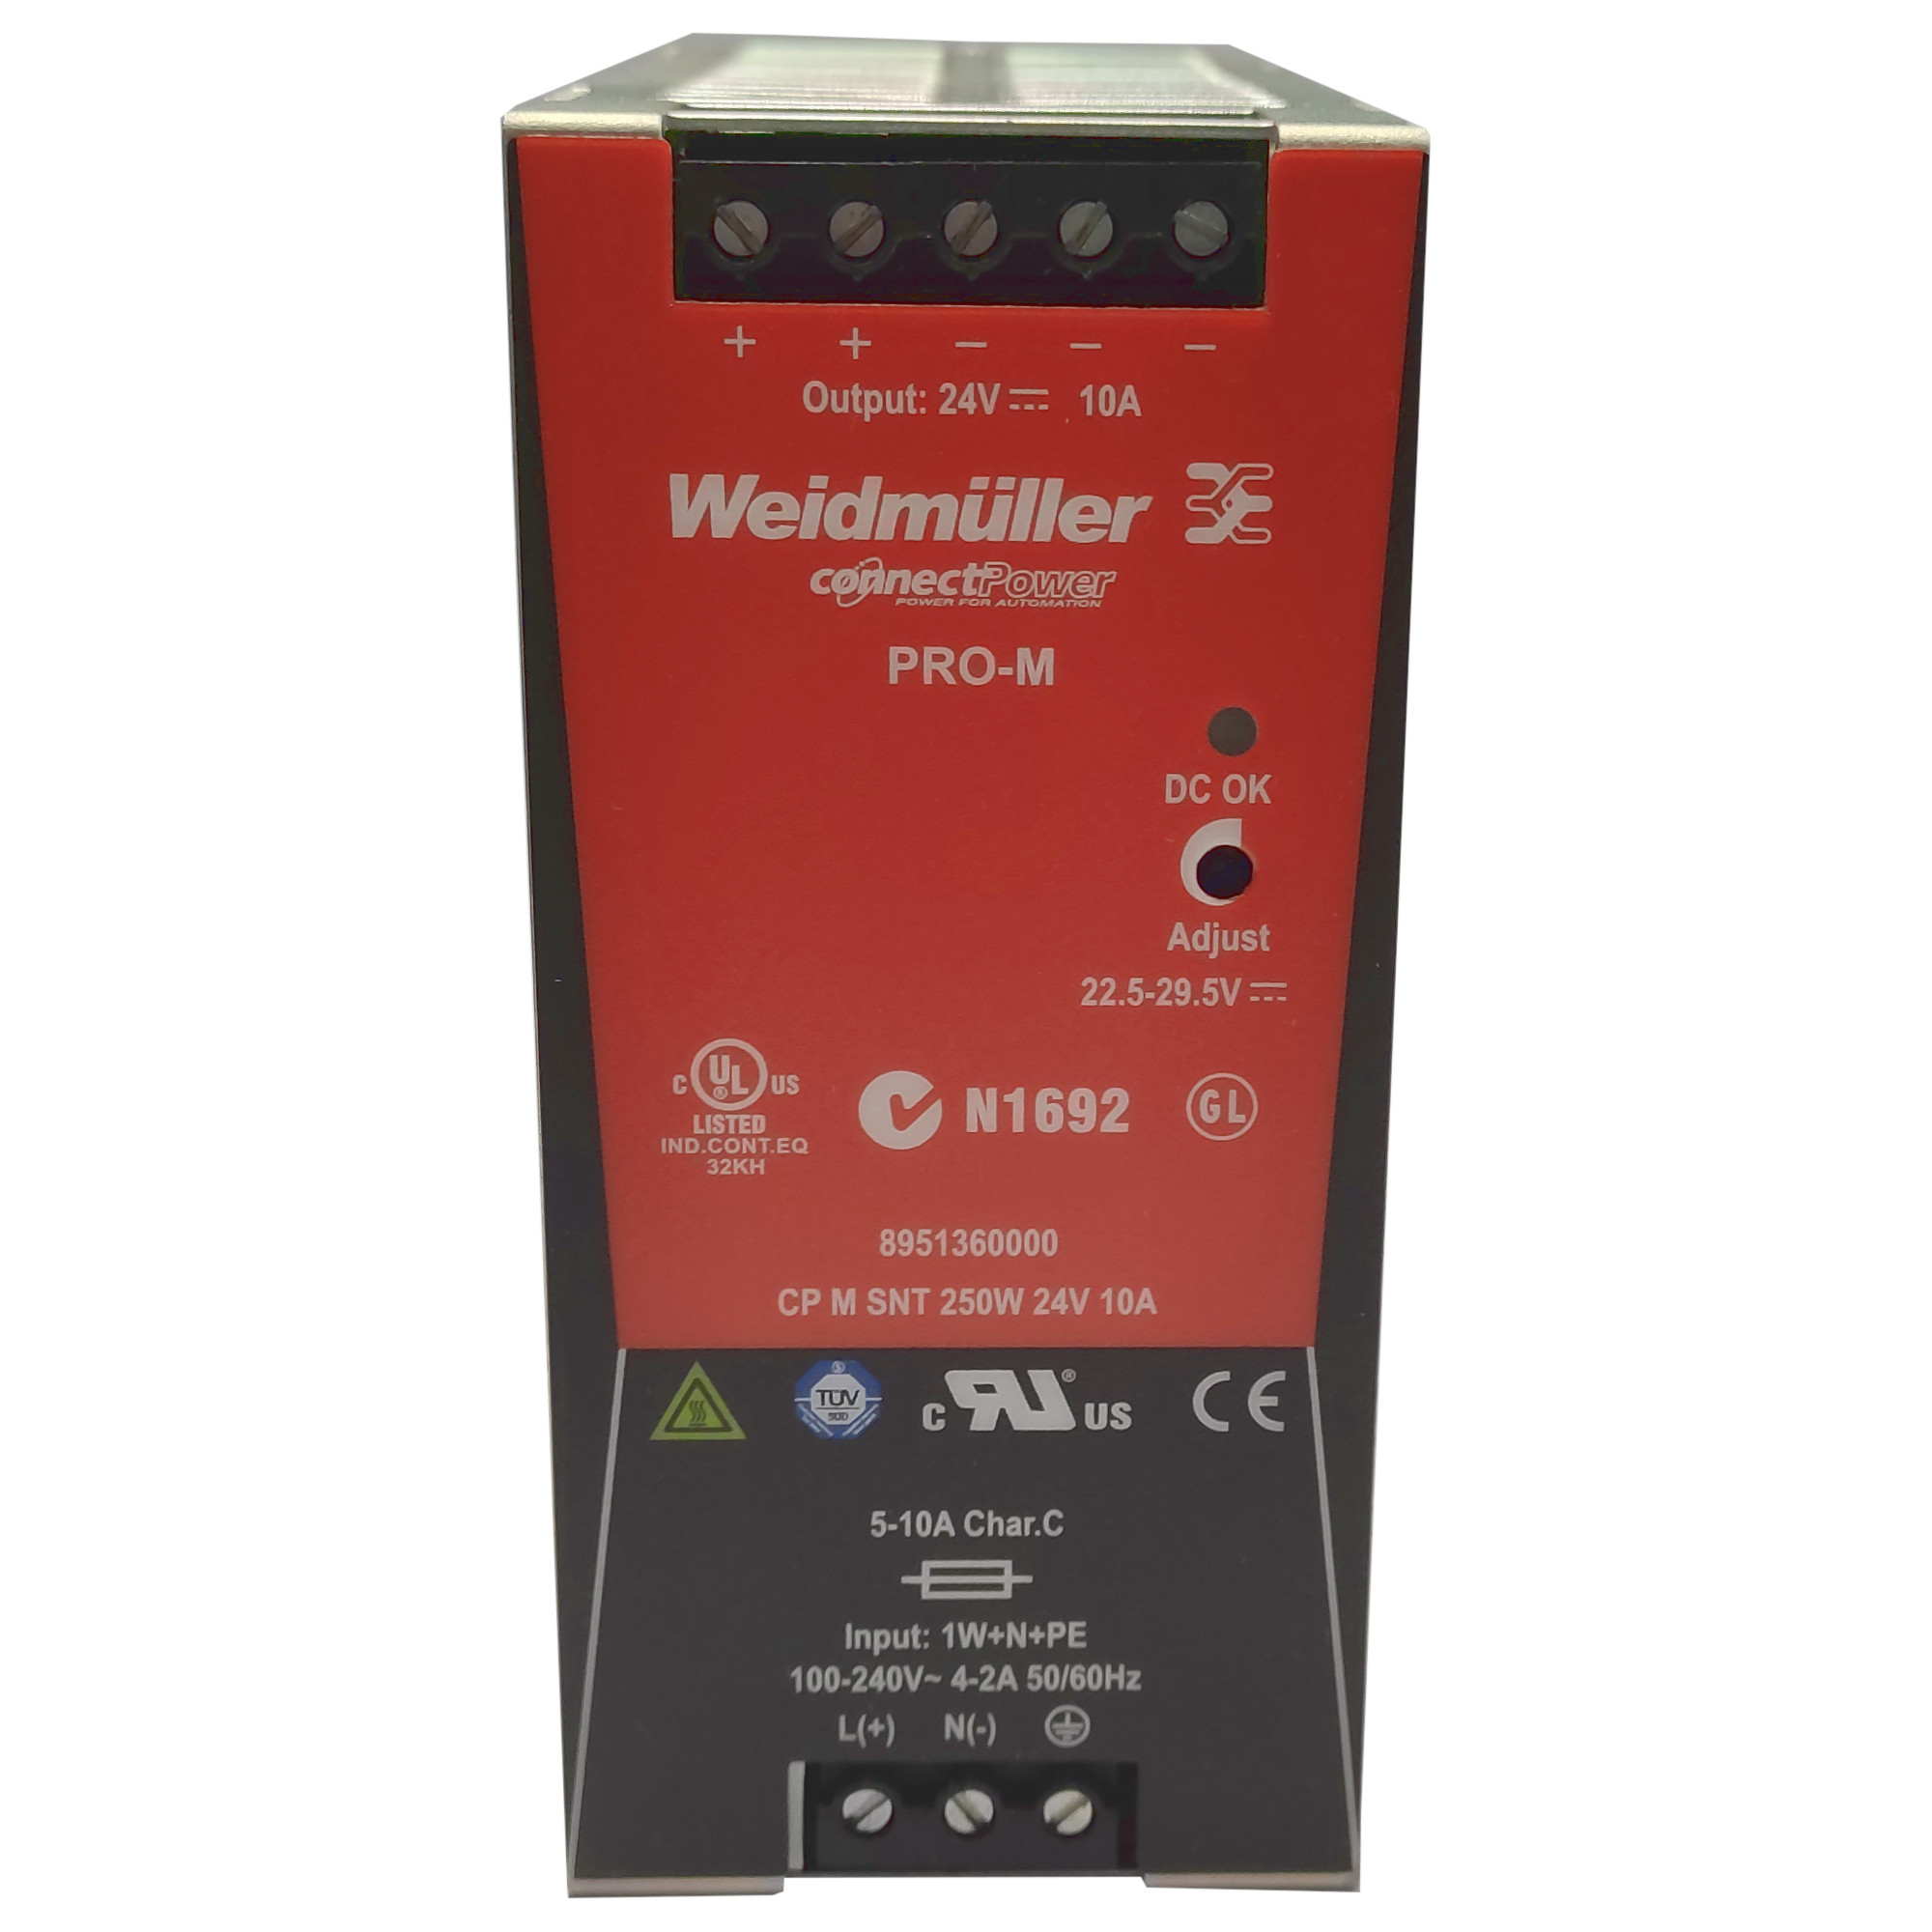 Weidmüller Power Supply CP M SNT 250W 24V 10A 8 ( 8951360000 )